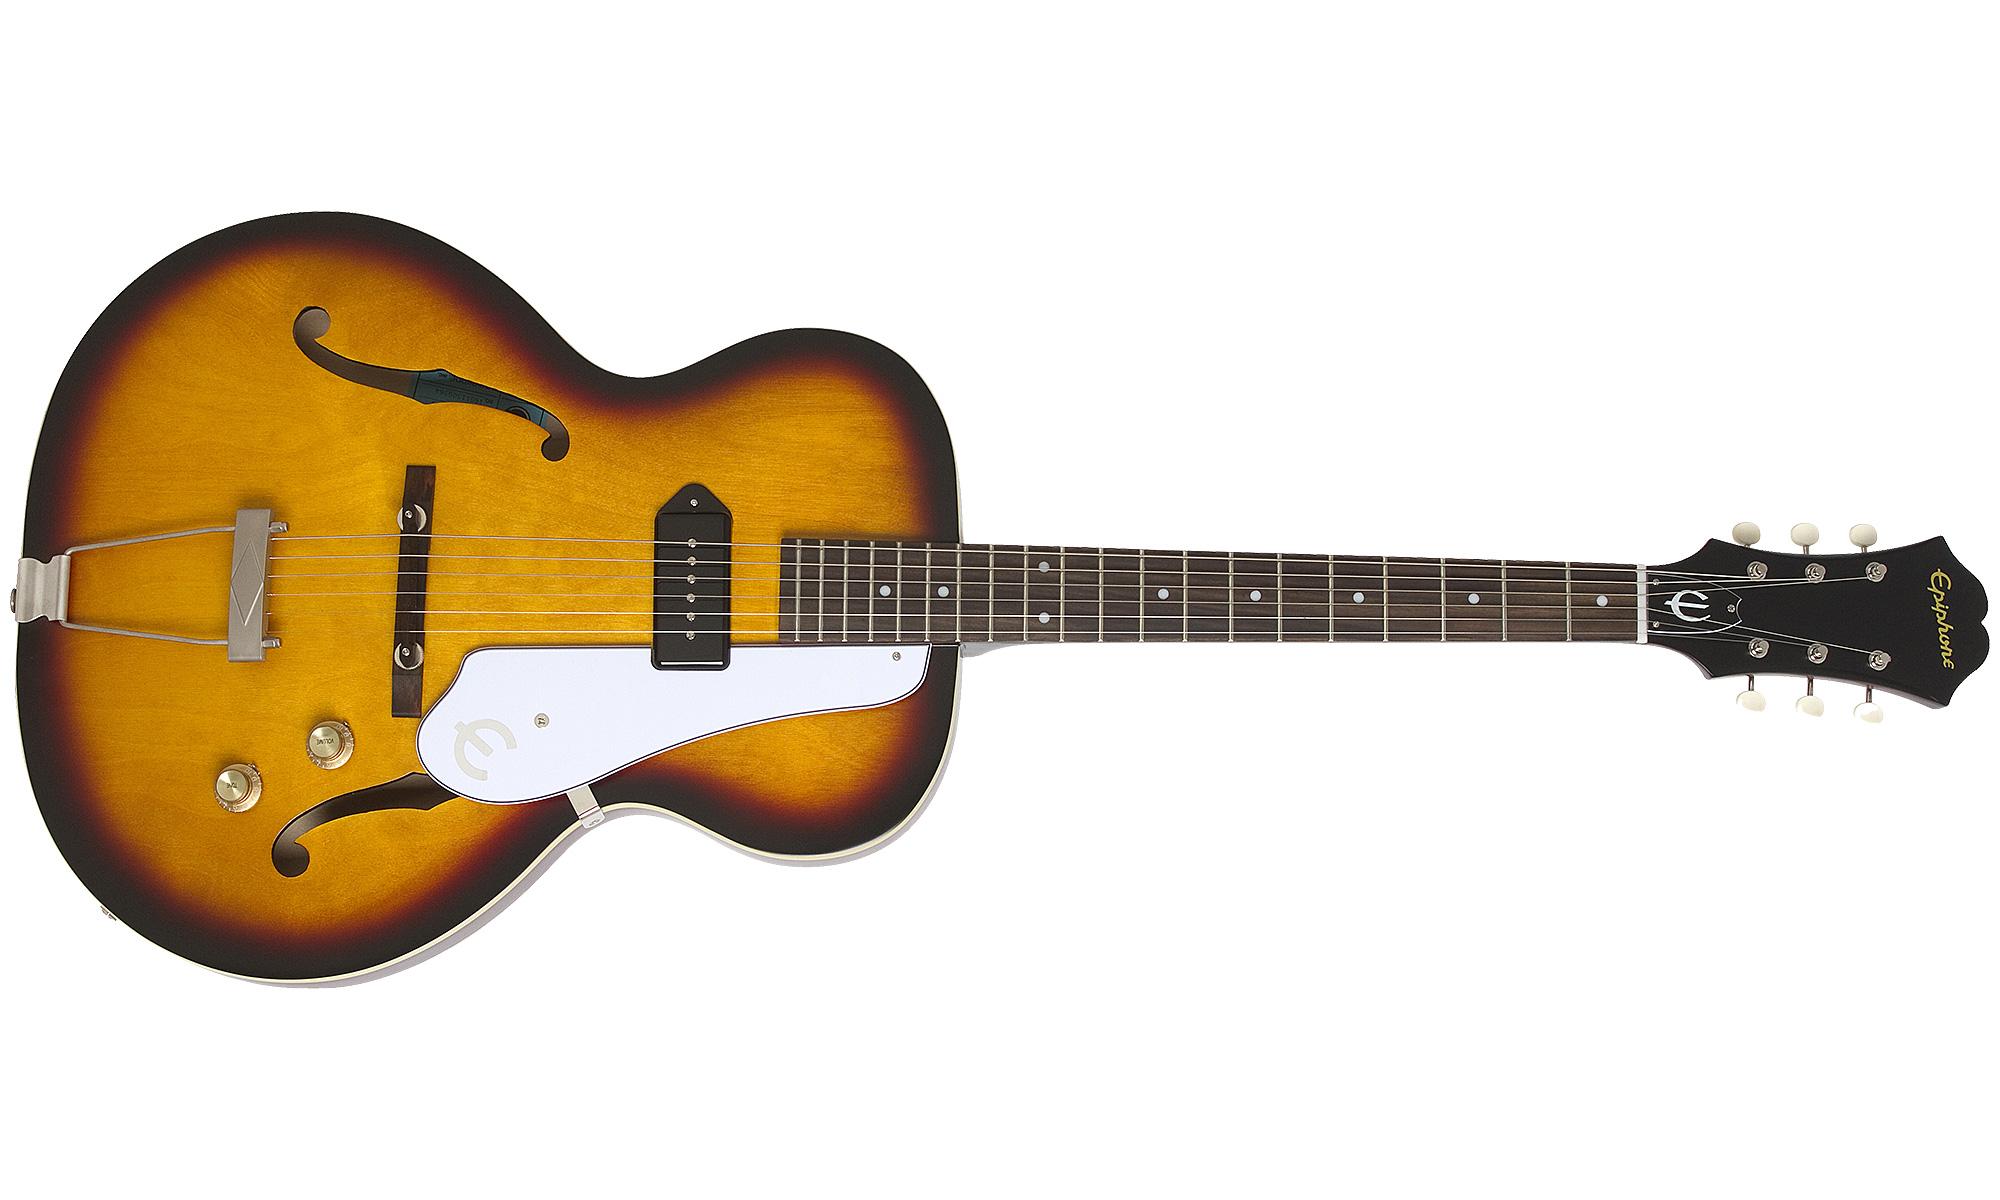 Epiphone Inspired By 1966 Century 2016 - Aged Gloss Vintage Sunburst - Semi-hollow electric guitar - Variation 1